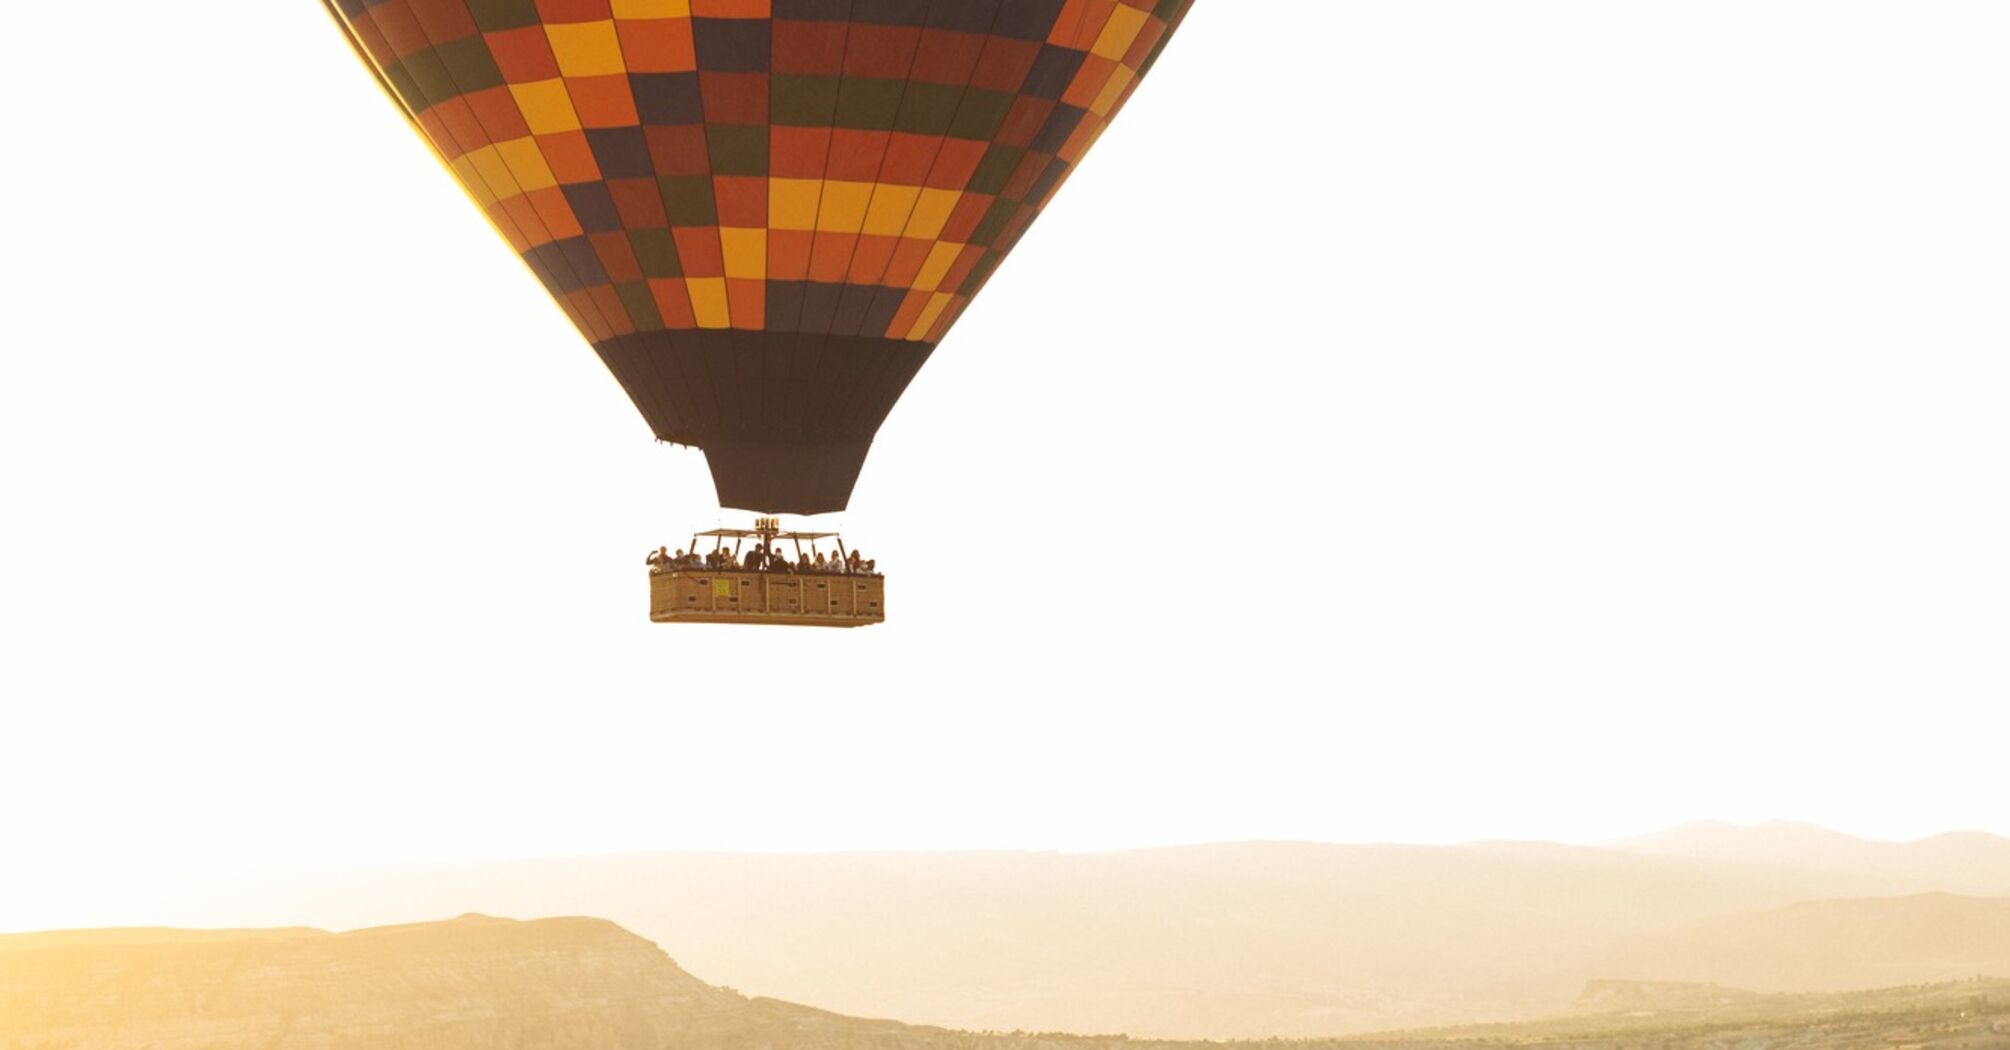 In Arizona, a hot air balloon crashed: 4 people died, 1 is in critical condition